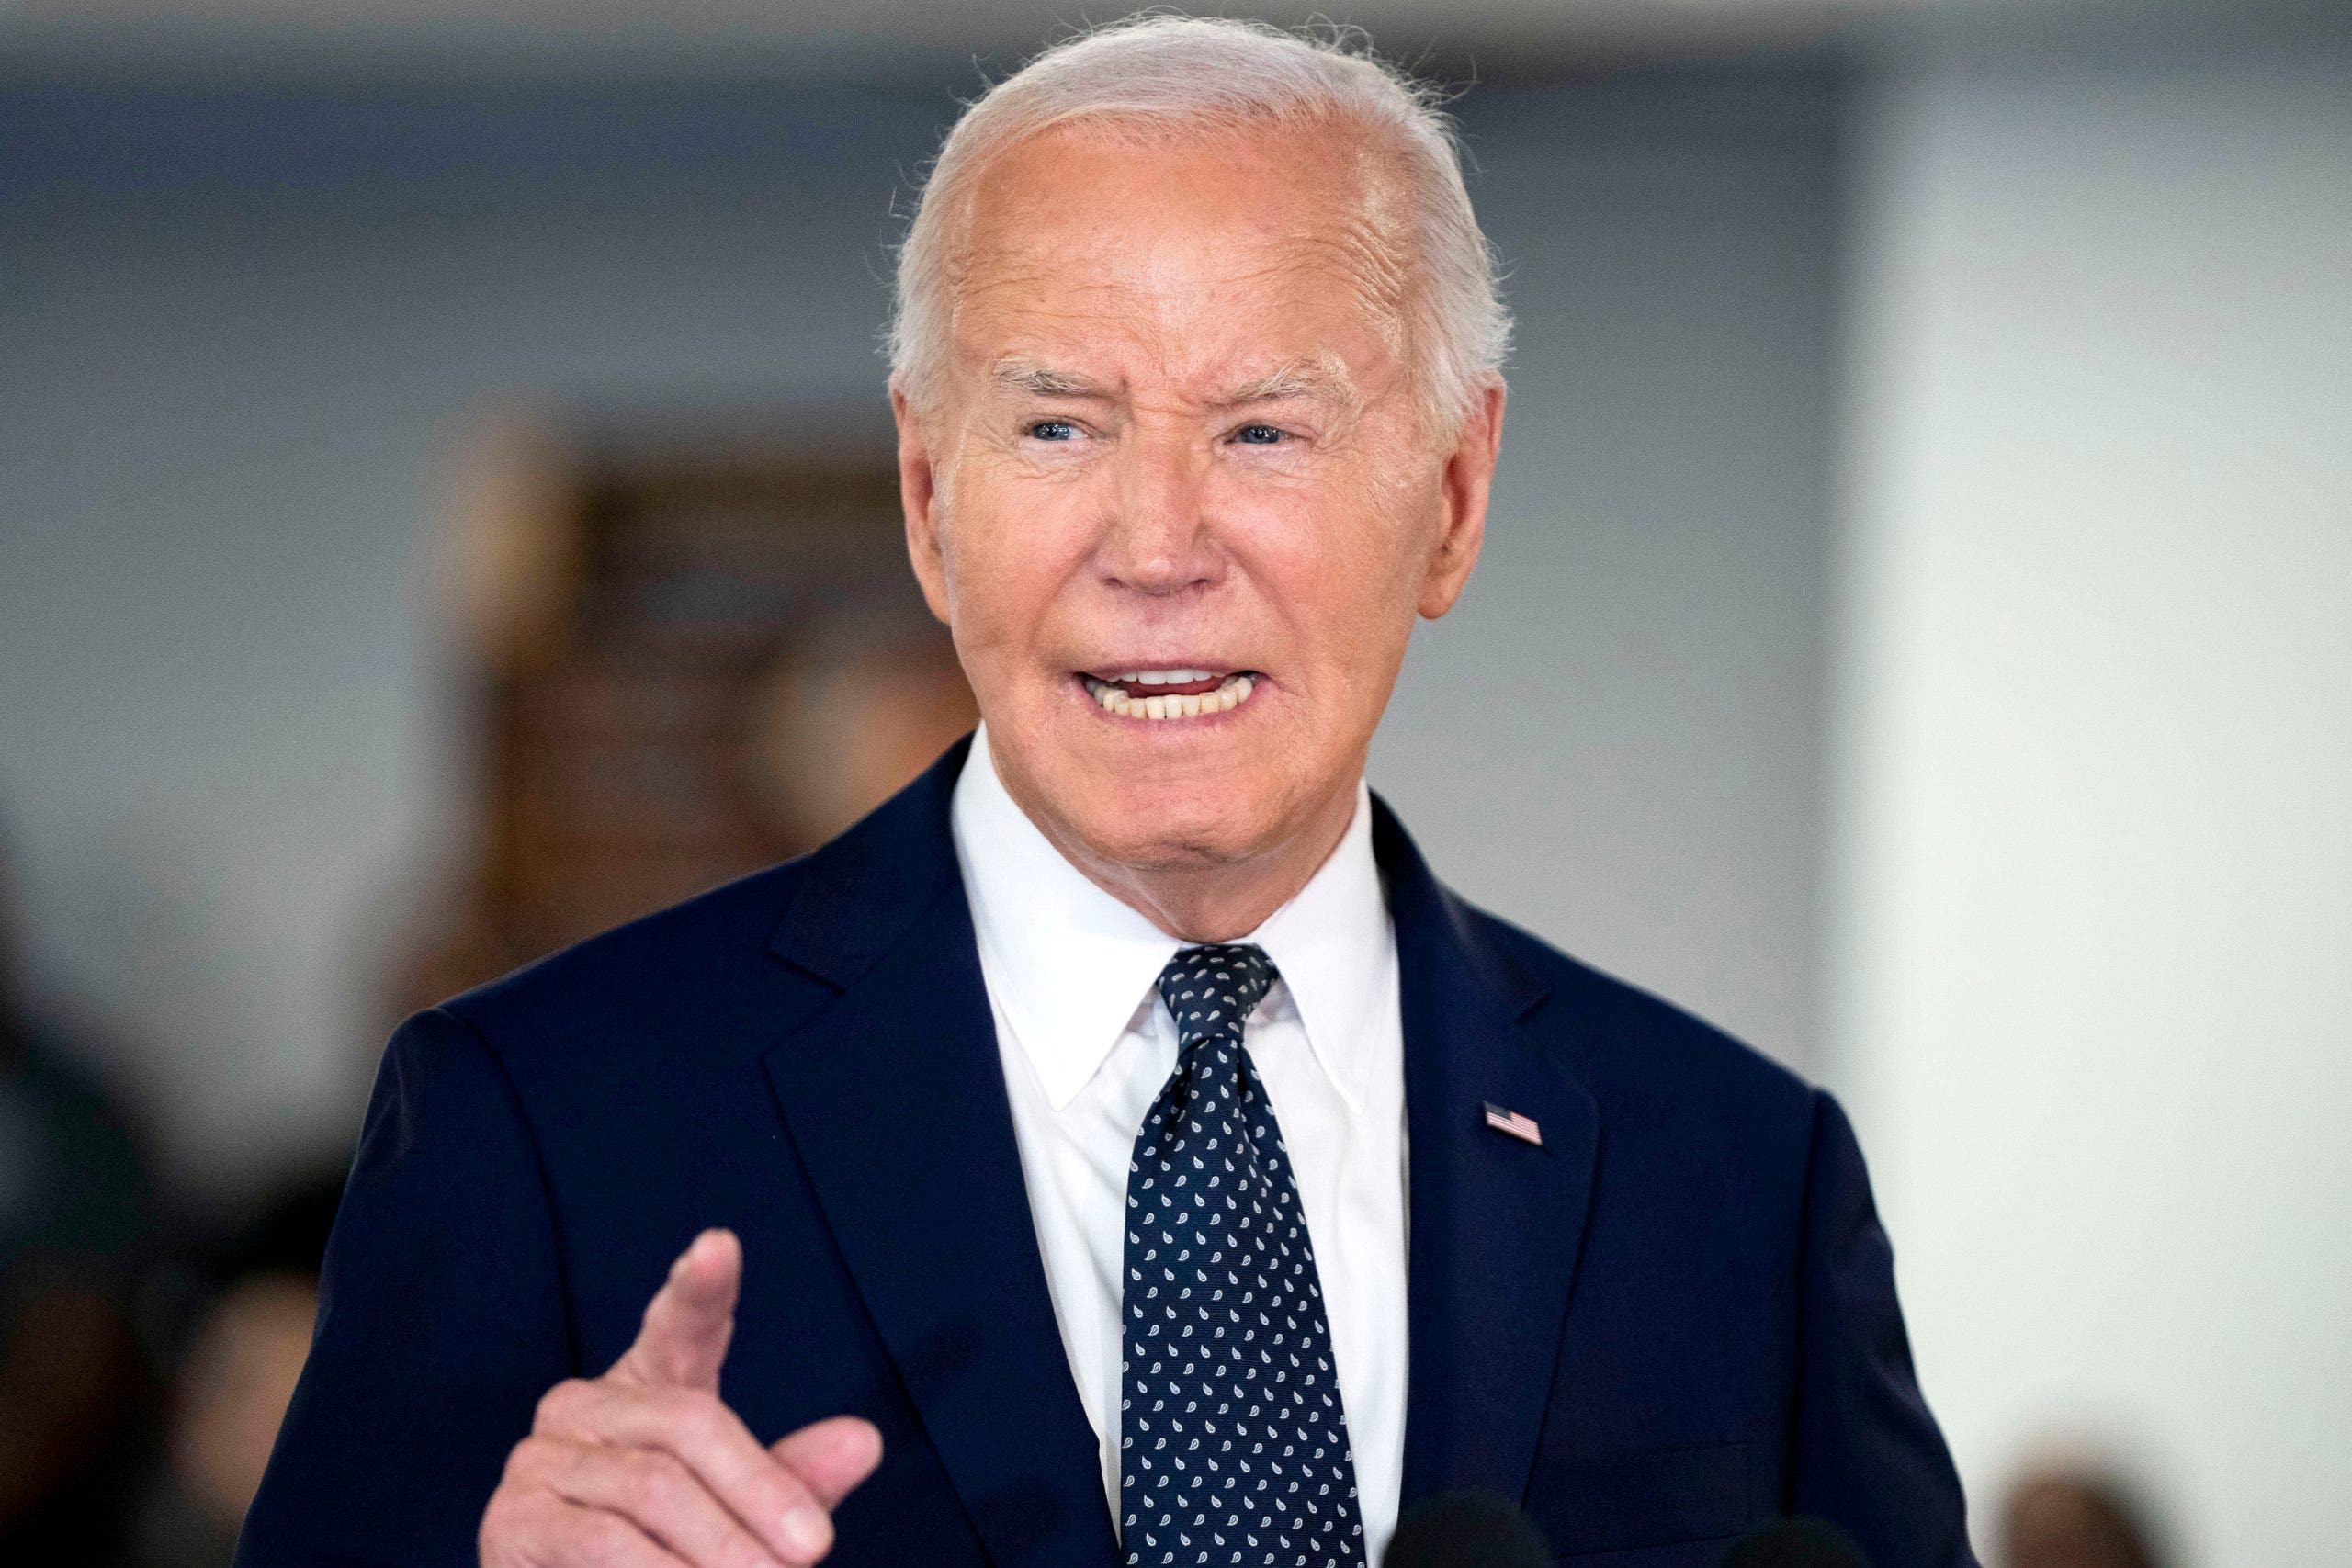 National security expert sounds alarm over Biden’s health: 'Can't have a part-time commander-in-chief'